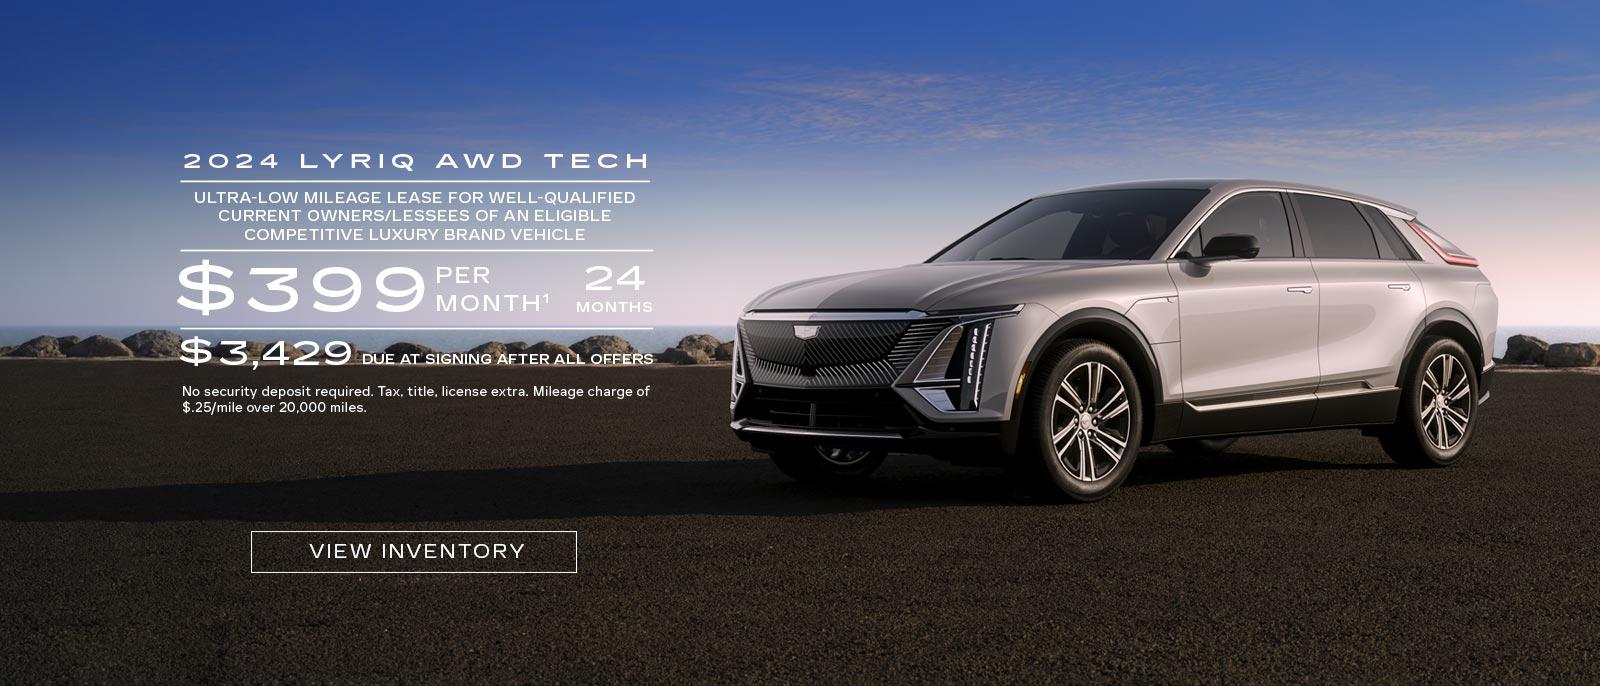 2024 LYRIQ AWD TECH. Ultra-low Mileage Lease for well-qualified current owners/lessees of an eligible competitive luxury brand vehicle. $399 per month. 24 months. $3,429 due at signing after all offers.